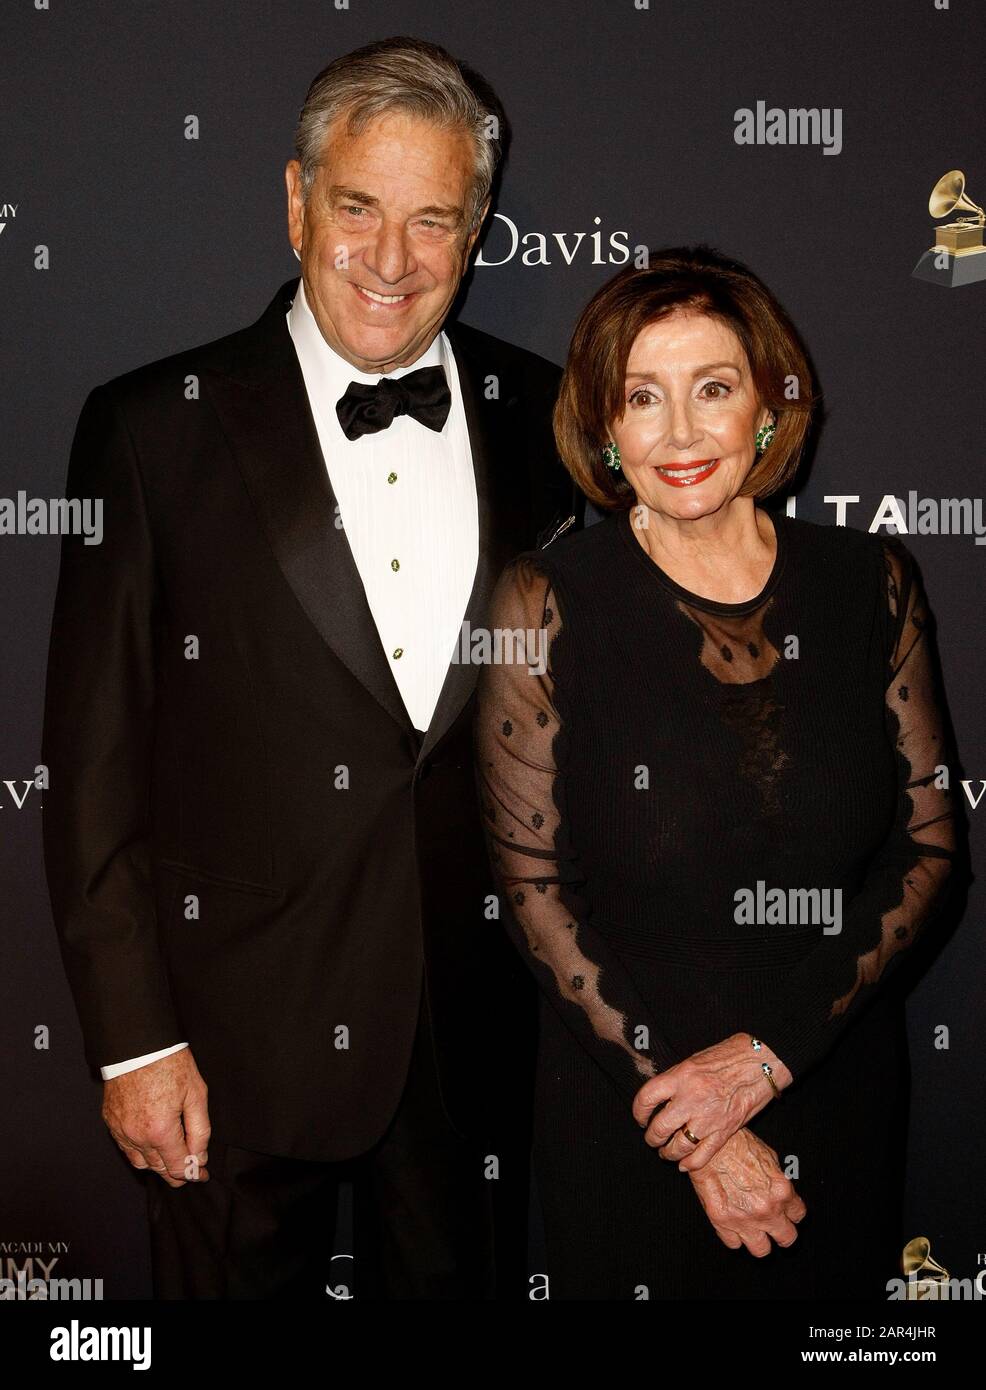 BEVERLY HILLS, CALIFORNIA - JANUARY 25: Paul Pelosi, Nancy Pelosi attend the Pre-GRAMMY Gala and GRAMMY Salute to Industry Icons at The Beverly Hilton Hotel on January 25, 2020 in Beverly Hills, California. Photo: CraSH/imageSPACE/MediaPunch Stock Photo